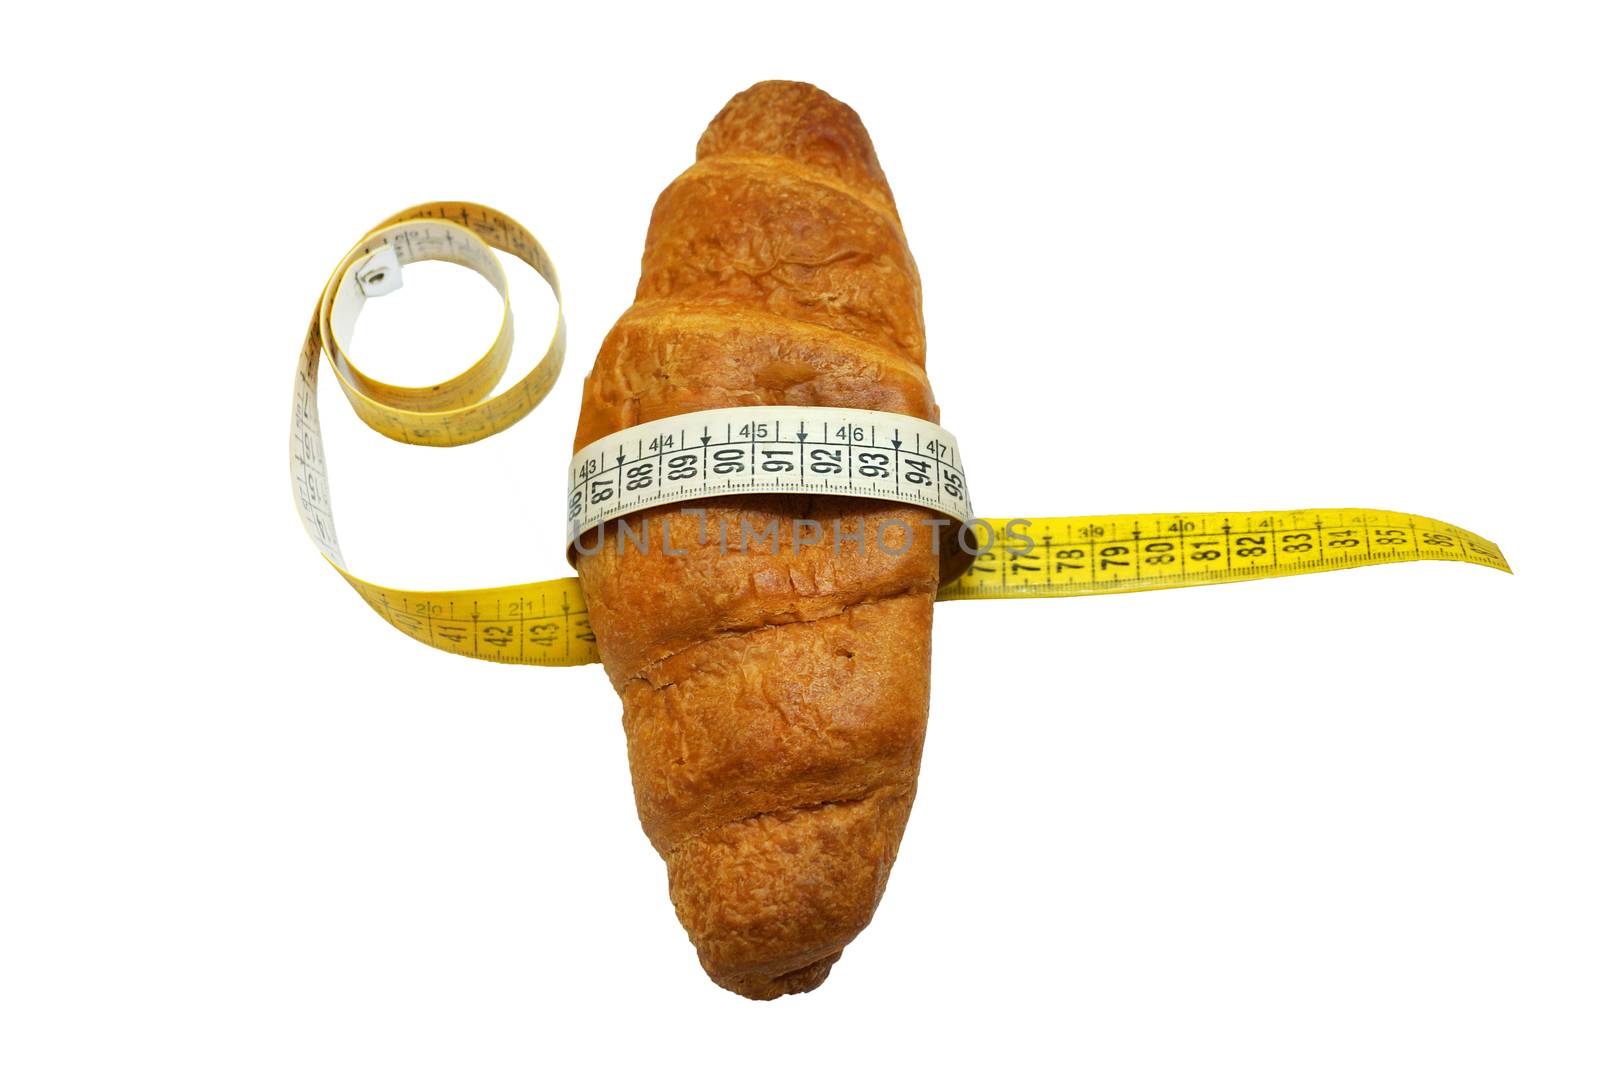 soft measuring ruler wrapped around a croissant as a symbol of unhealthy nutrition, isolate on a white background. by Annado